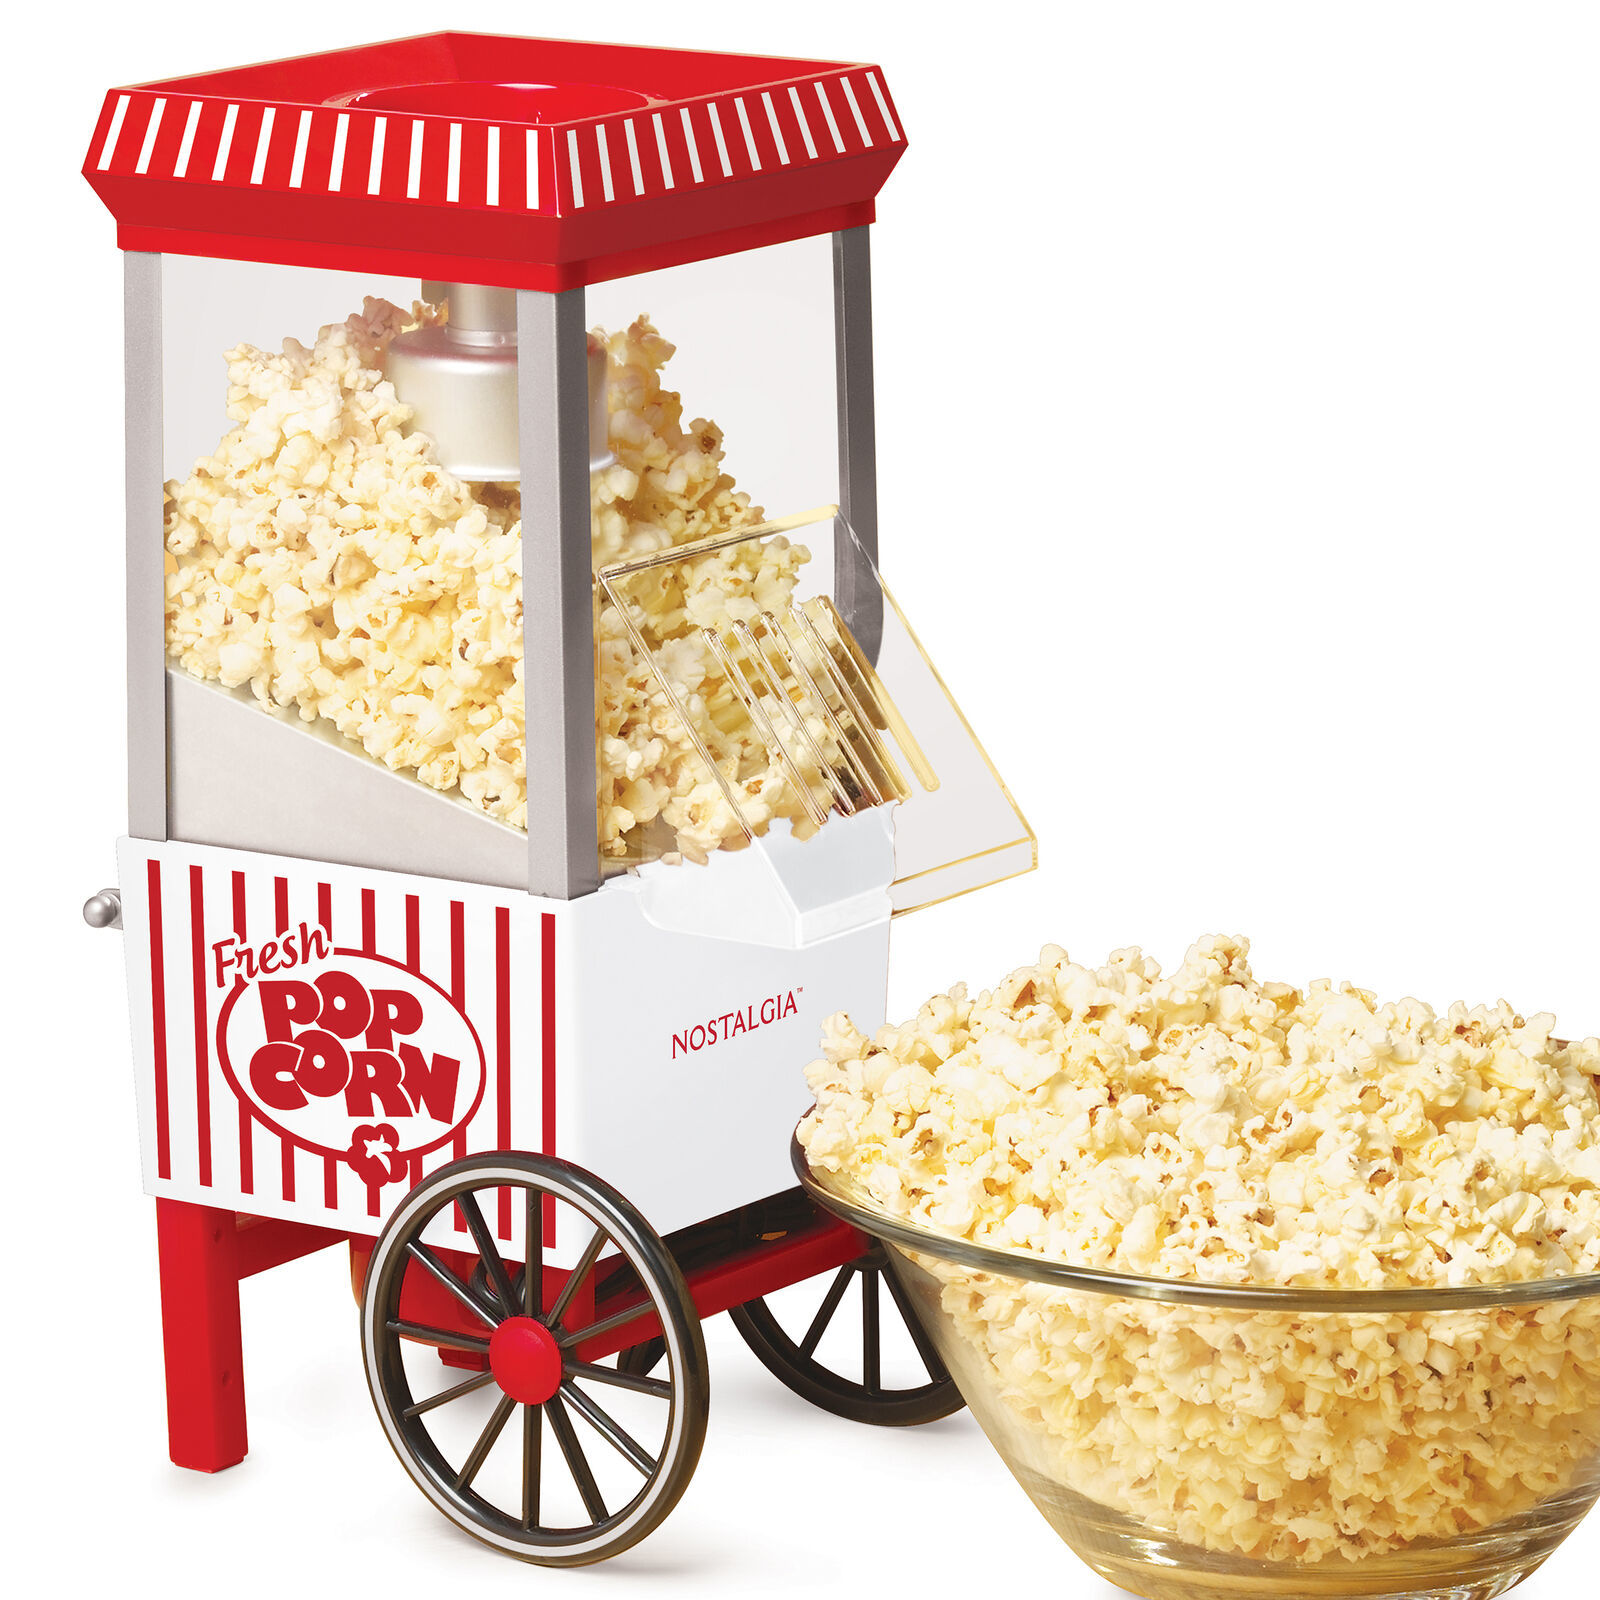 Old Fashioned Hot Air Popcorn Maker - $110.00